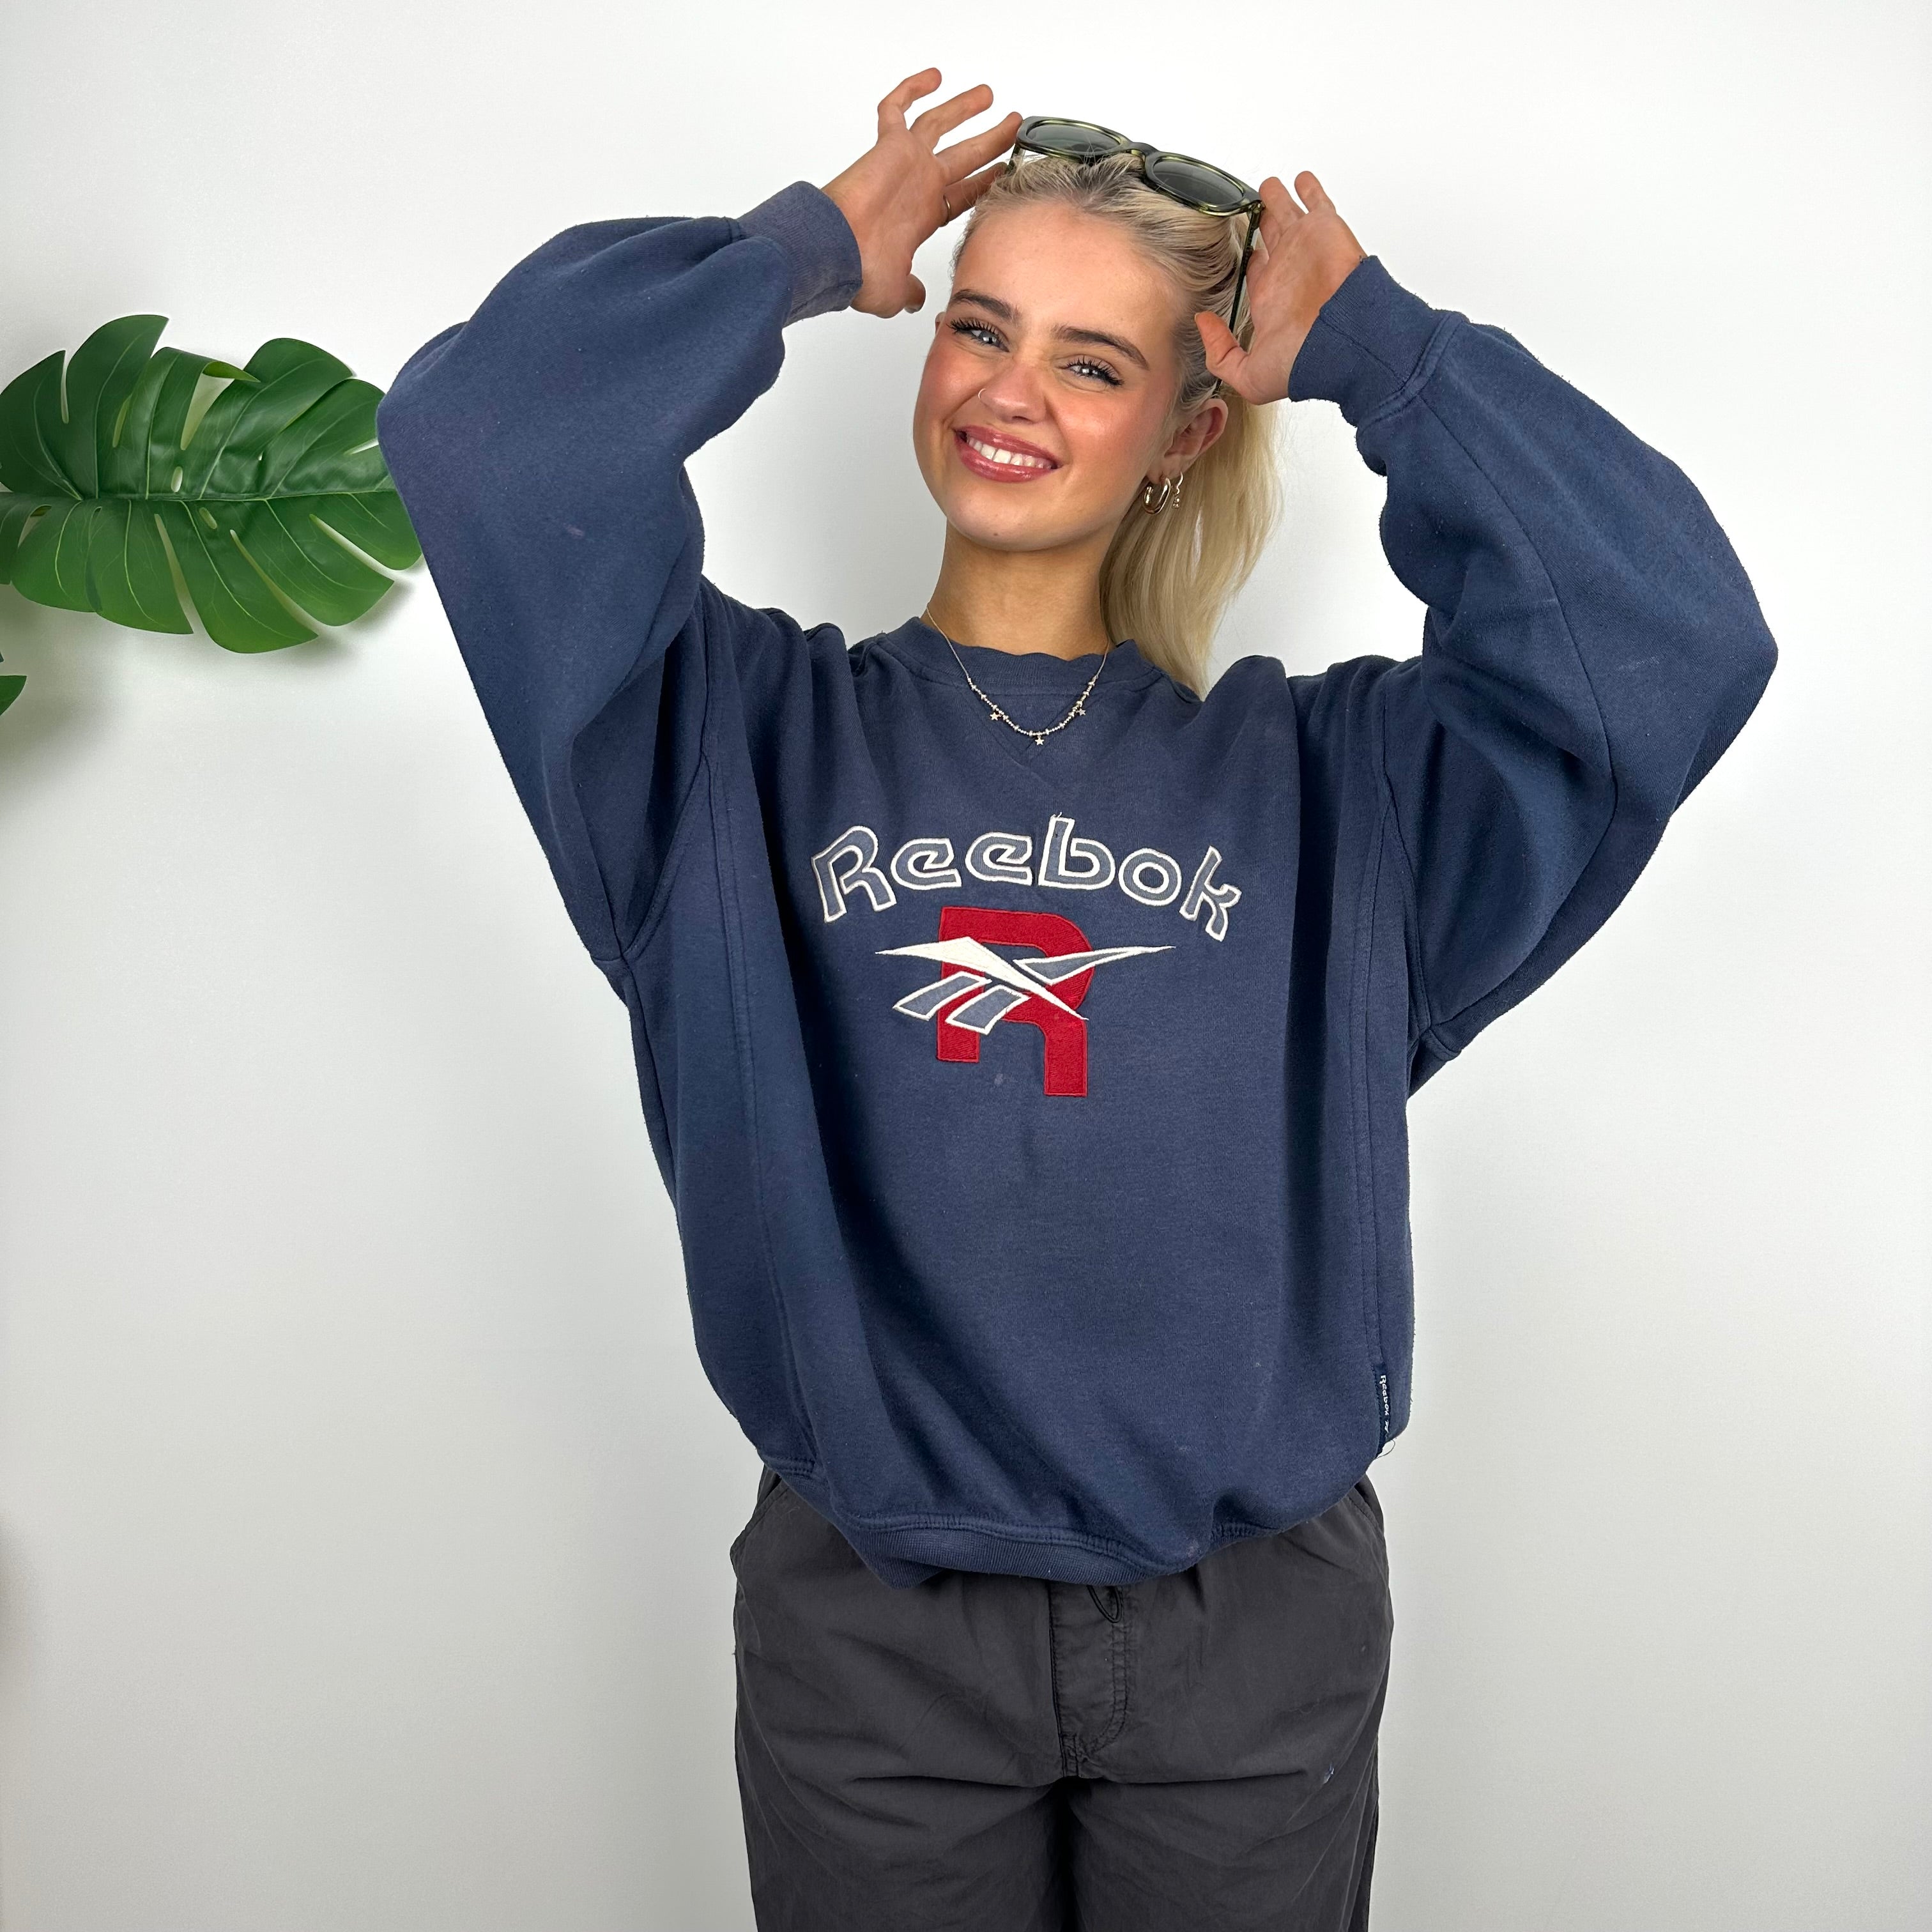 Reebok Navy Embroidered Spell Out Sweatshirt (S)